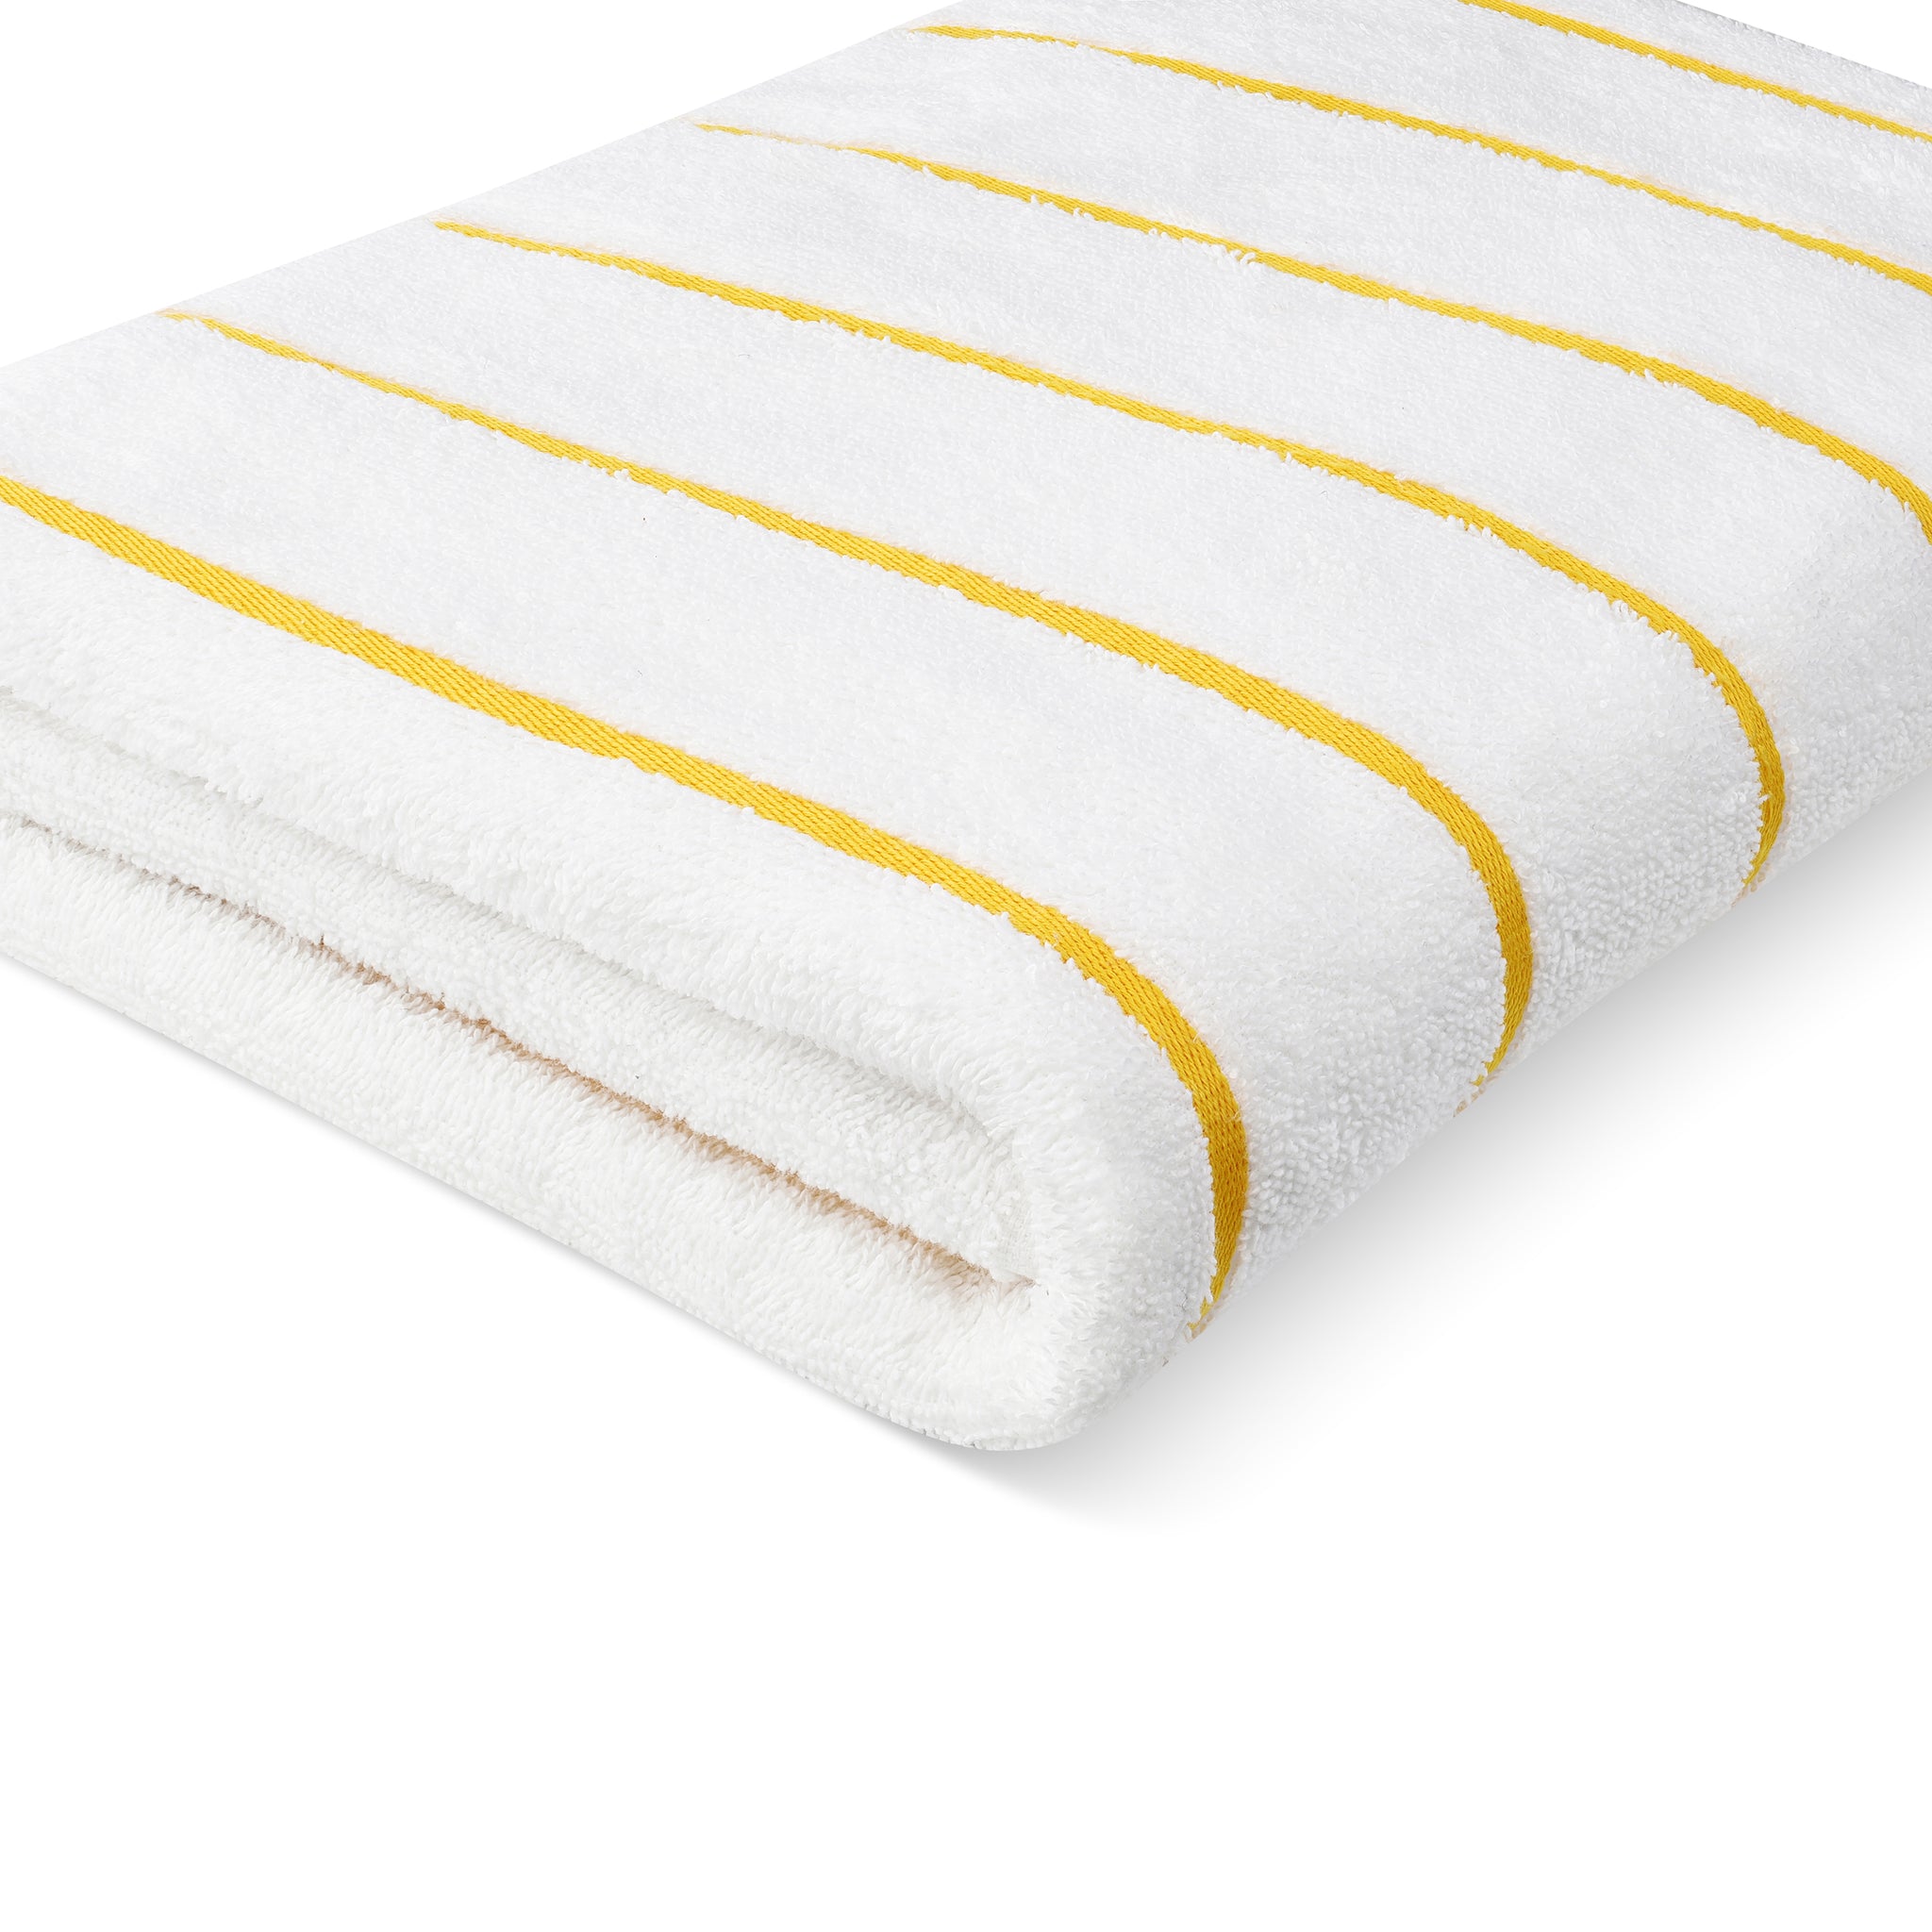 Bath Towels by MIMAATEX-6 Pack-White 100% Cotton 24x50 Inch Bath